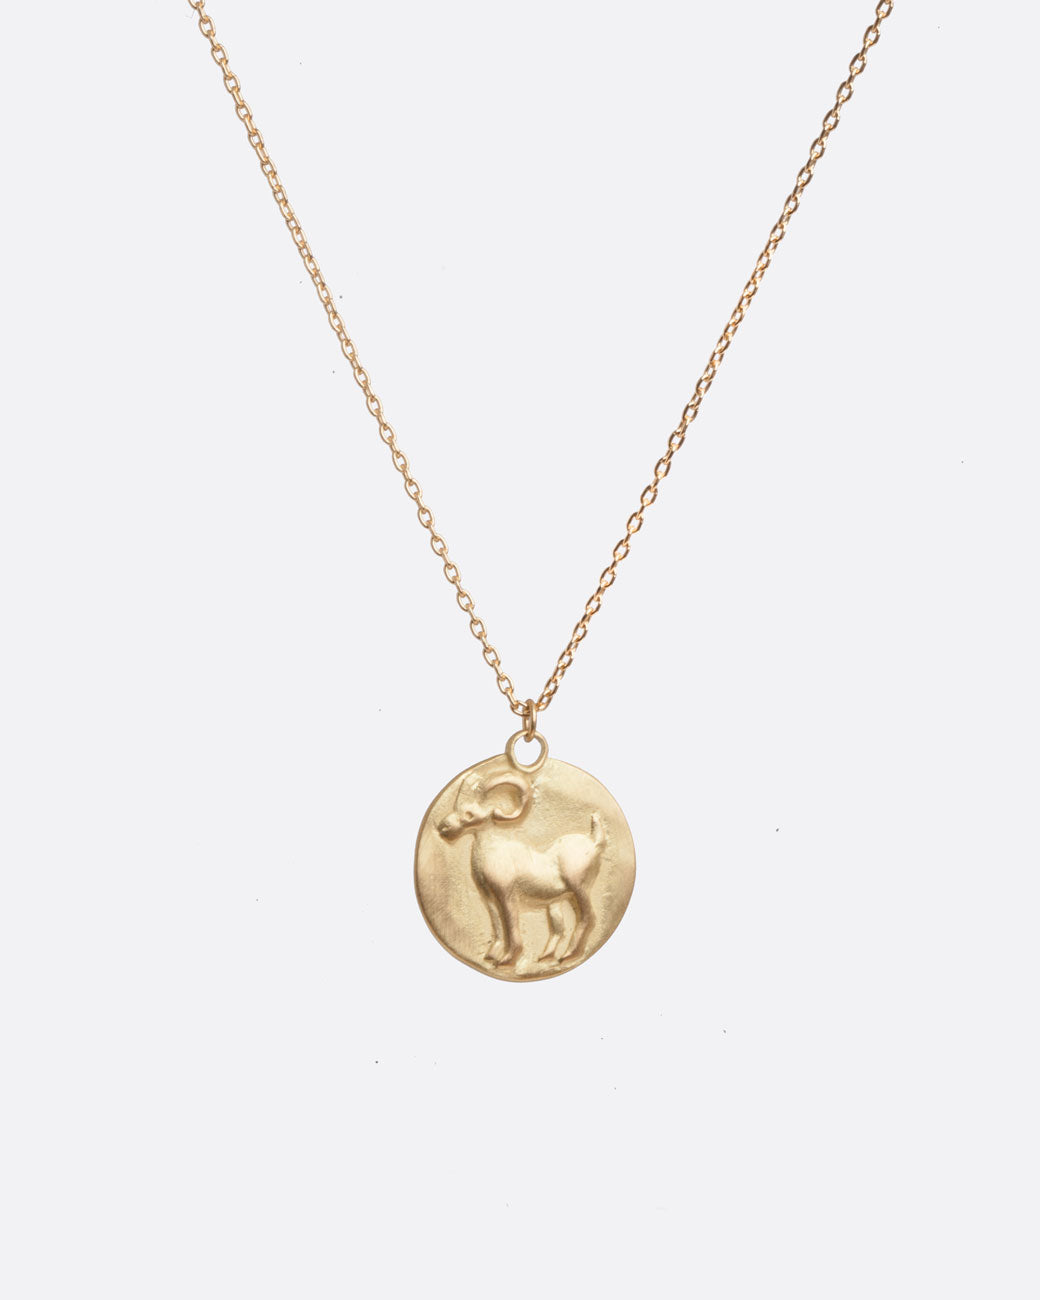 A yellow gold necklace with a round pendant with your choice of zodiac symbol.